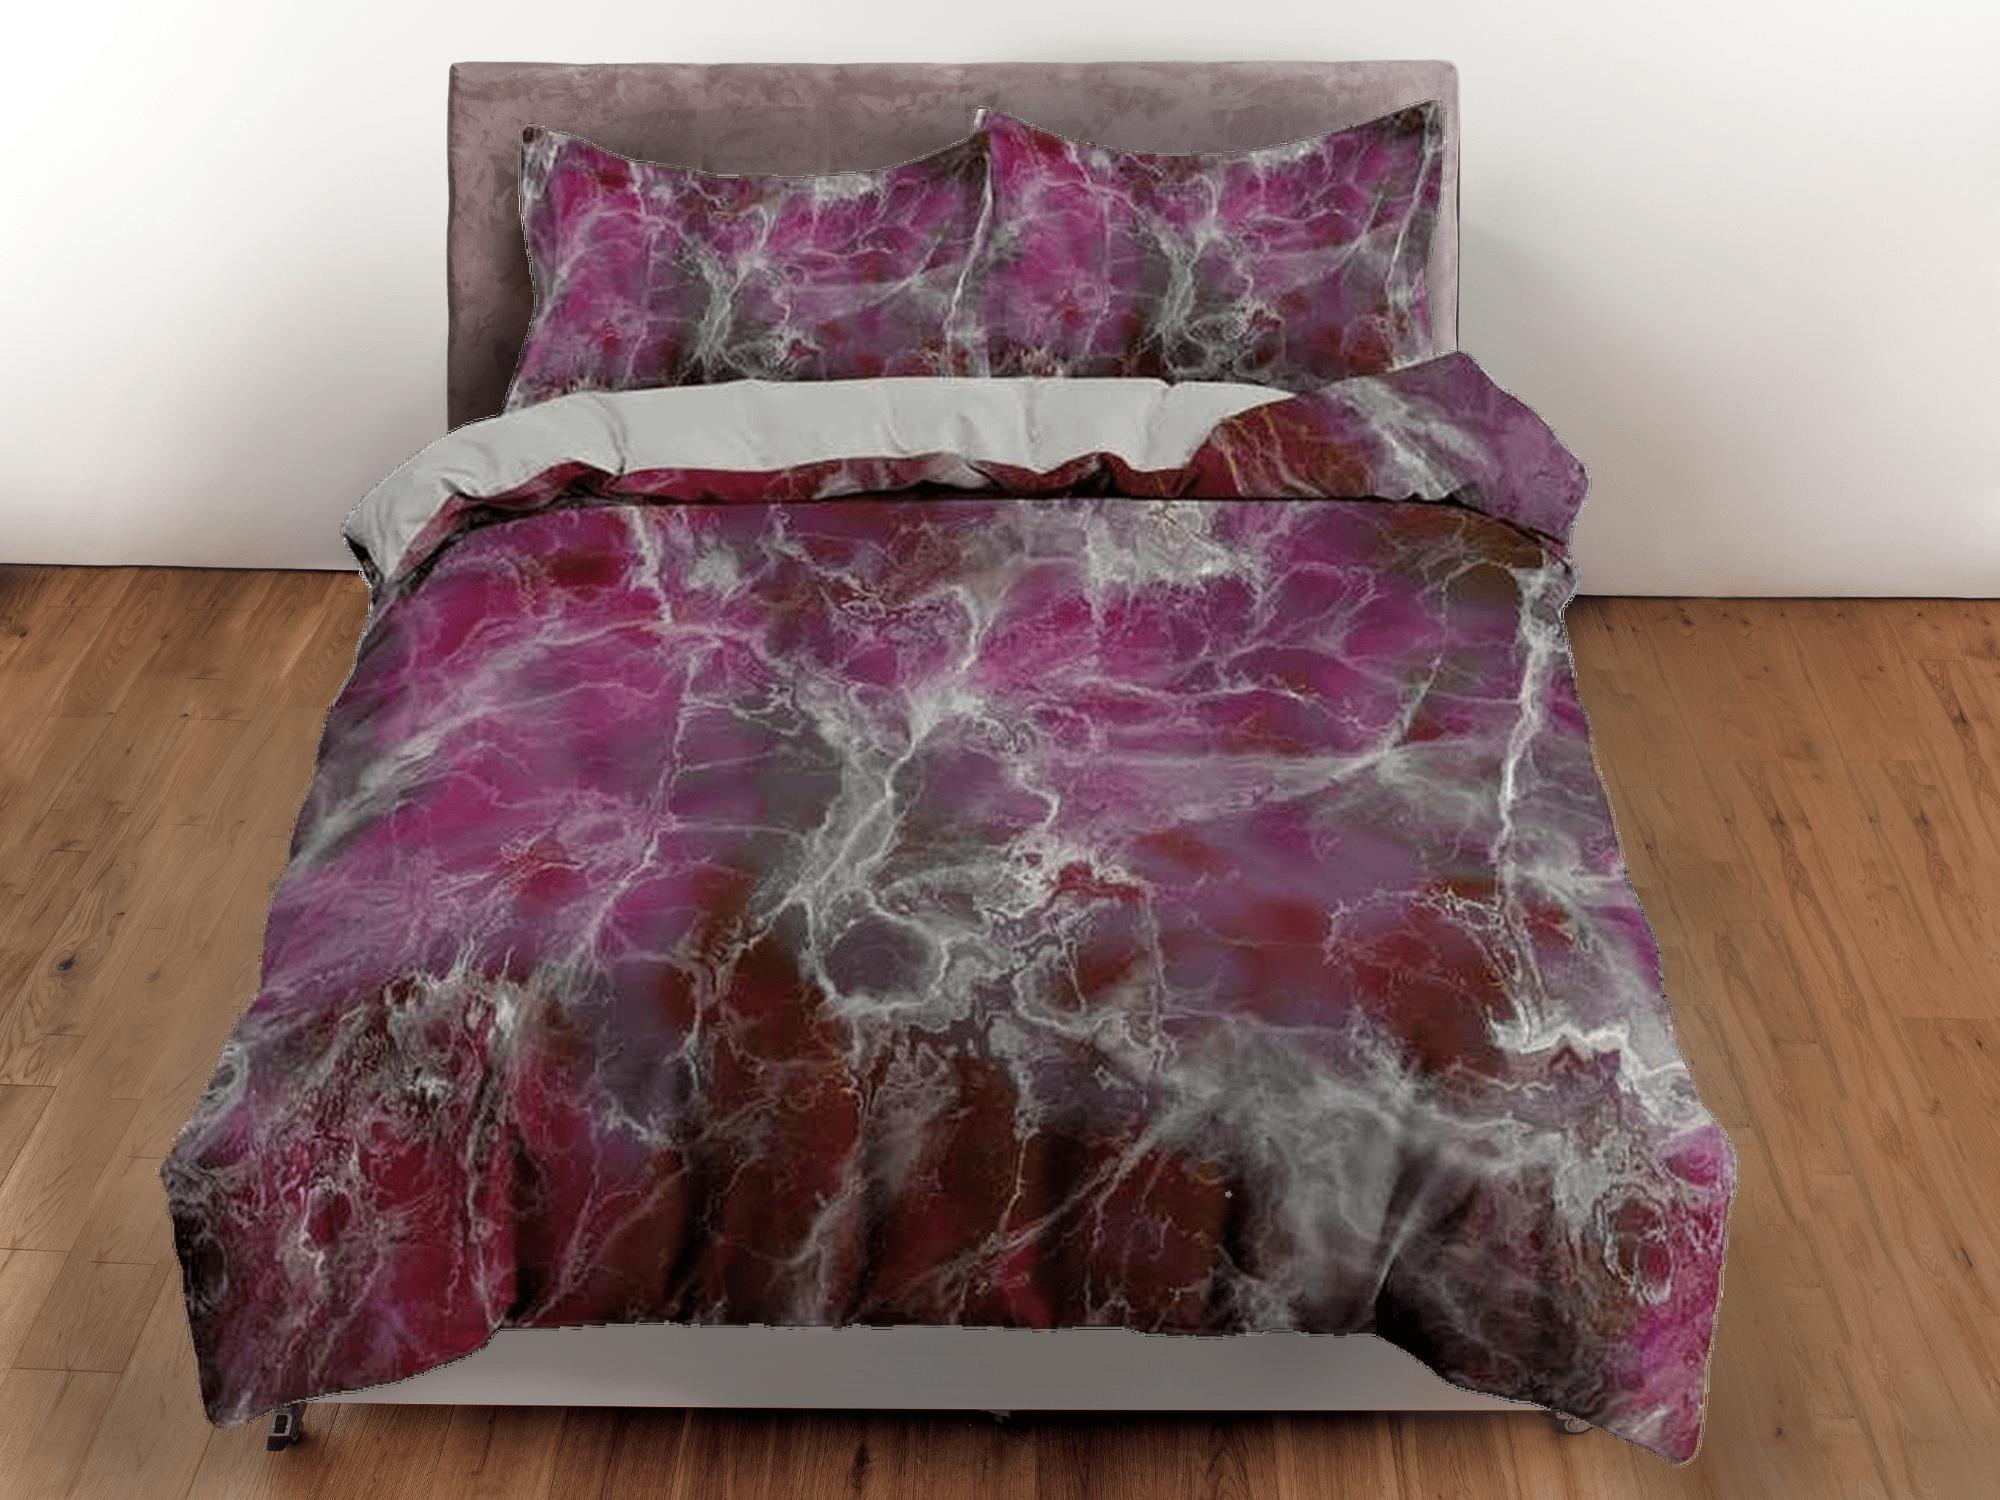 daintyduvet Contemporary bedroom set violet maroon aesthetic duvet cover, alcohol ink abstract art room decor boho chic bedding set full king queen